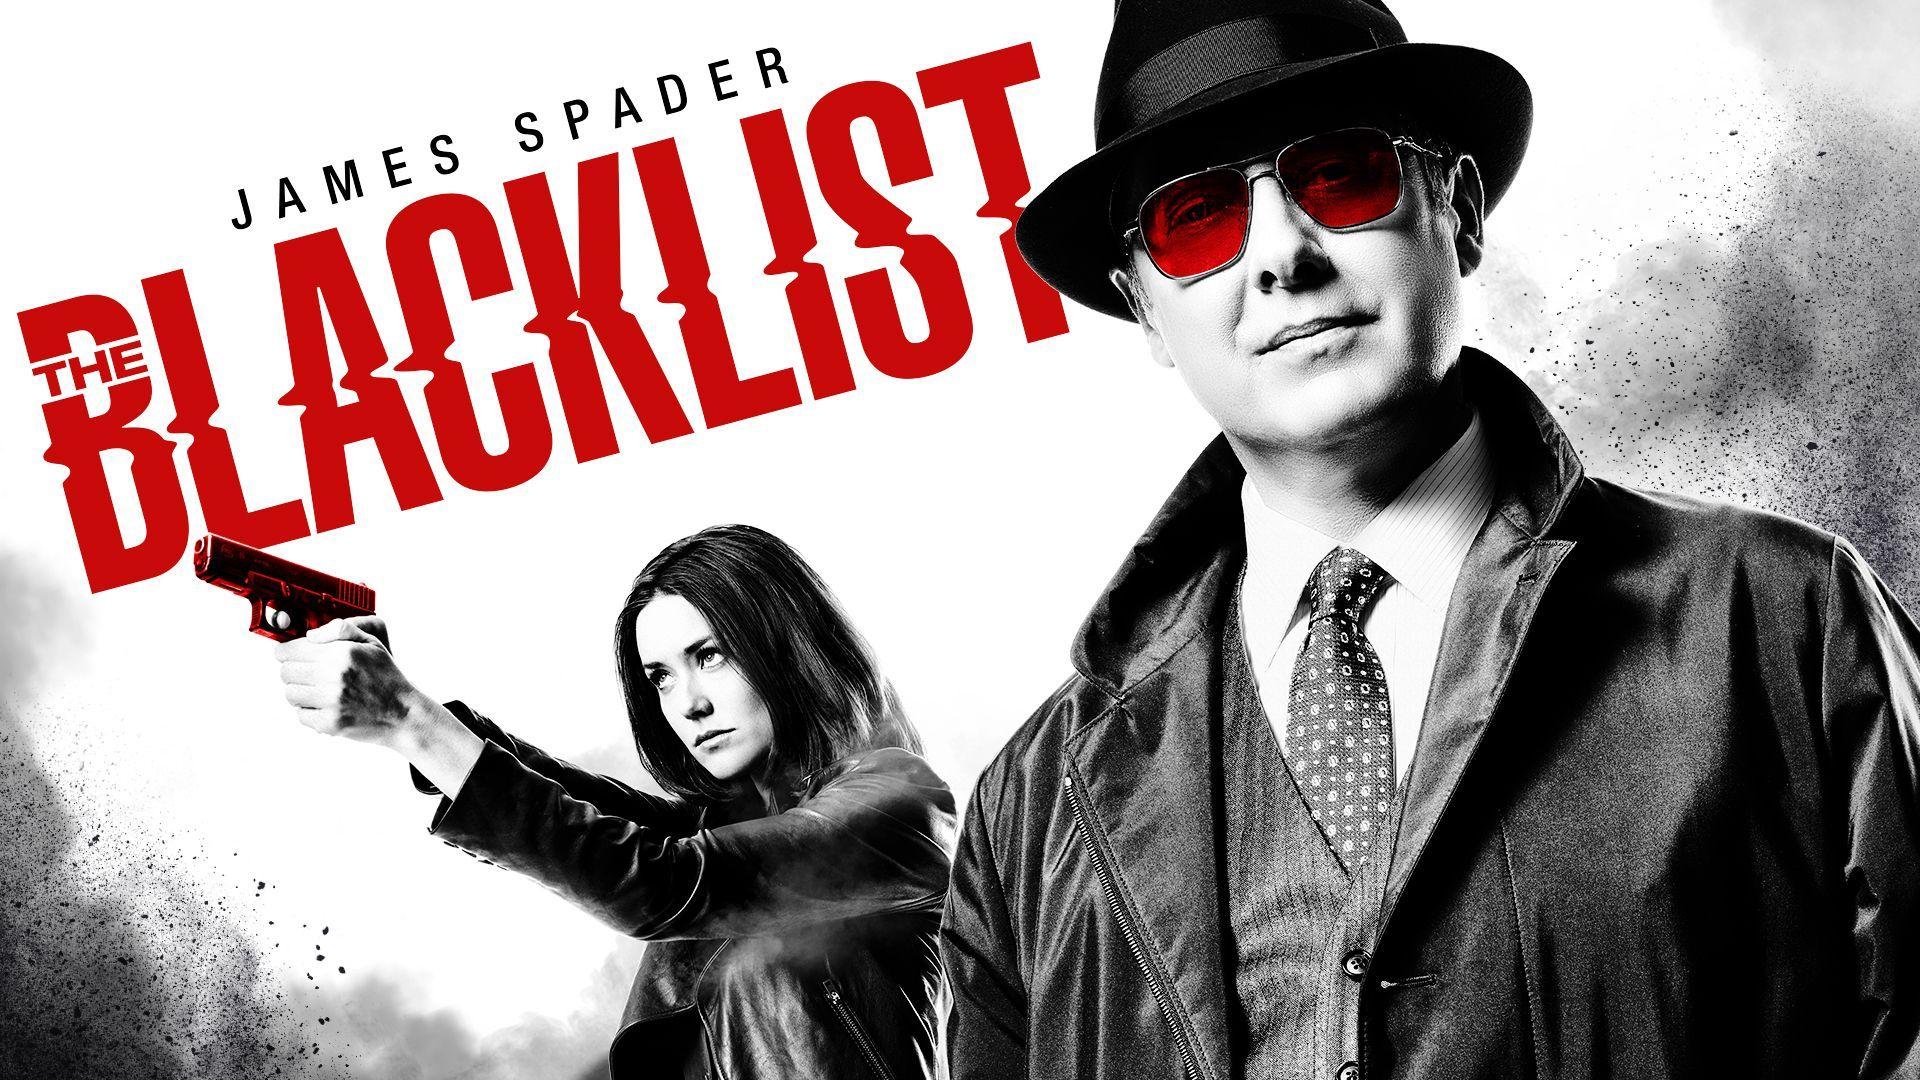 The Blacklist Wallpaper High Resolution and Quality Download